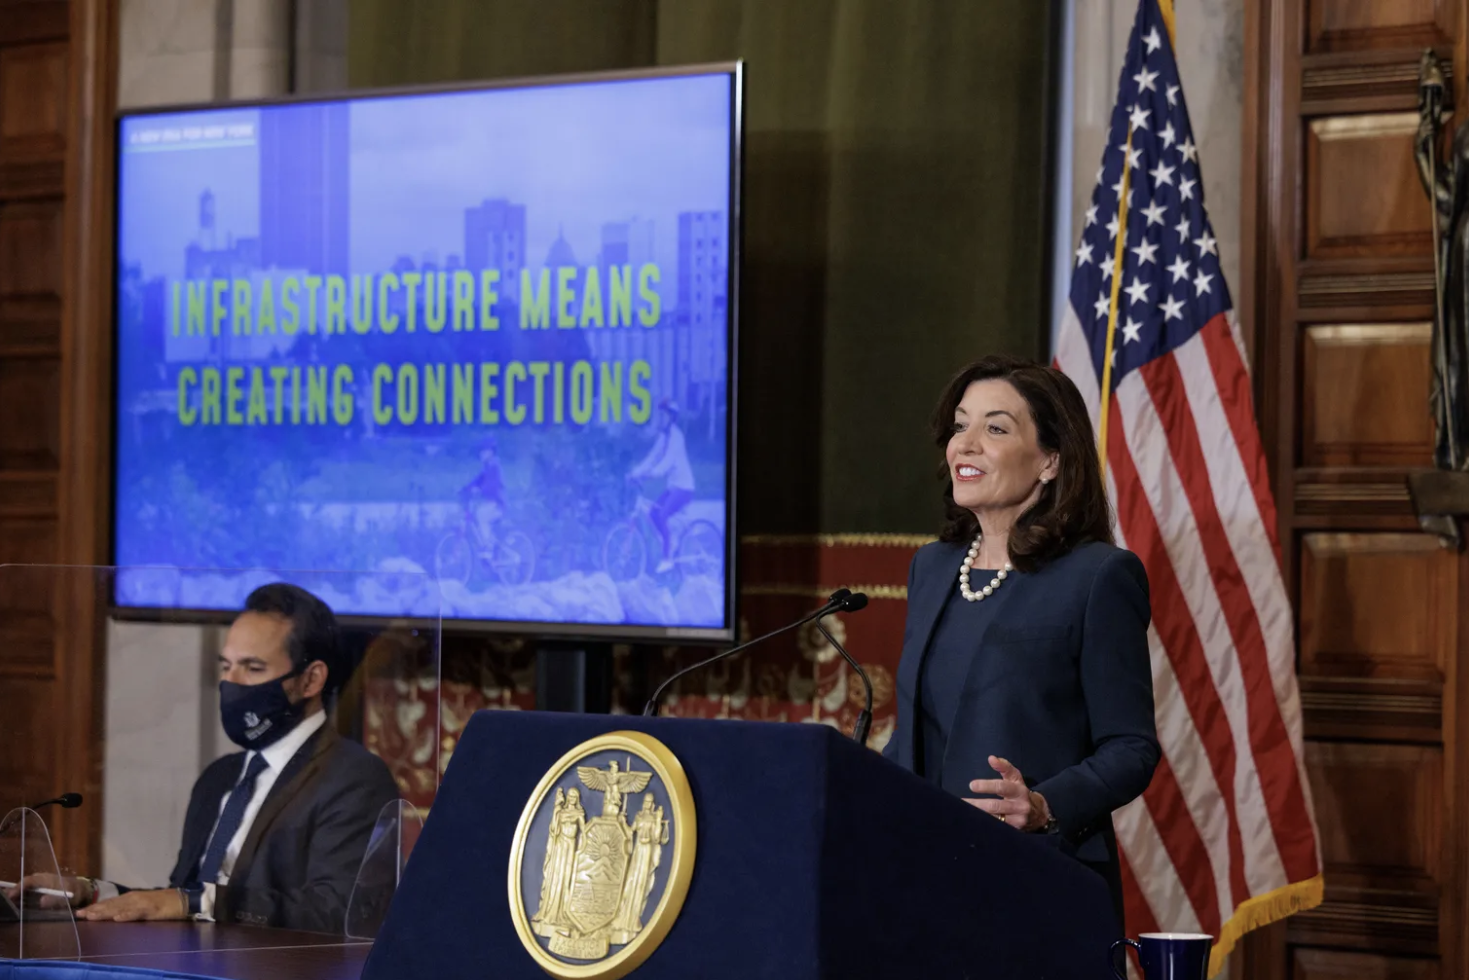 Hochul proposes $2.1 billion increase for NY schools, extension of NYC mayoral control